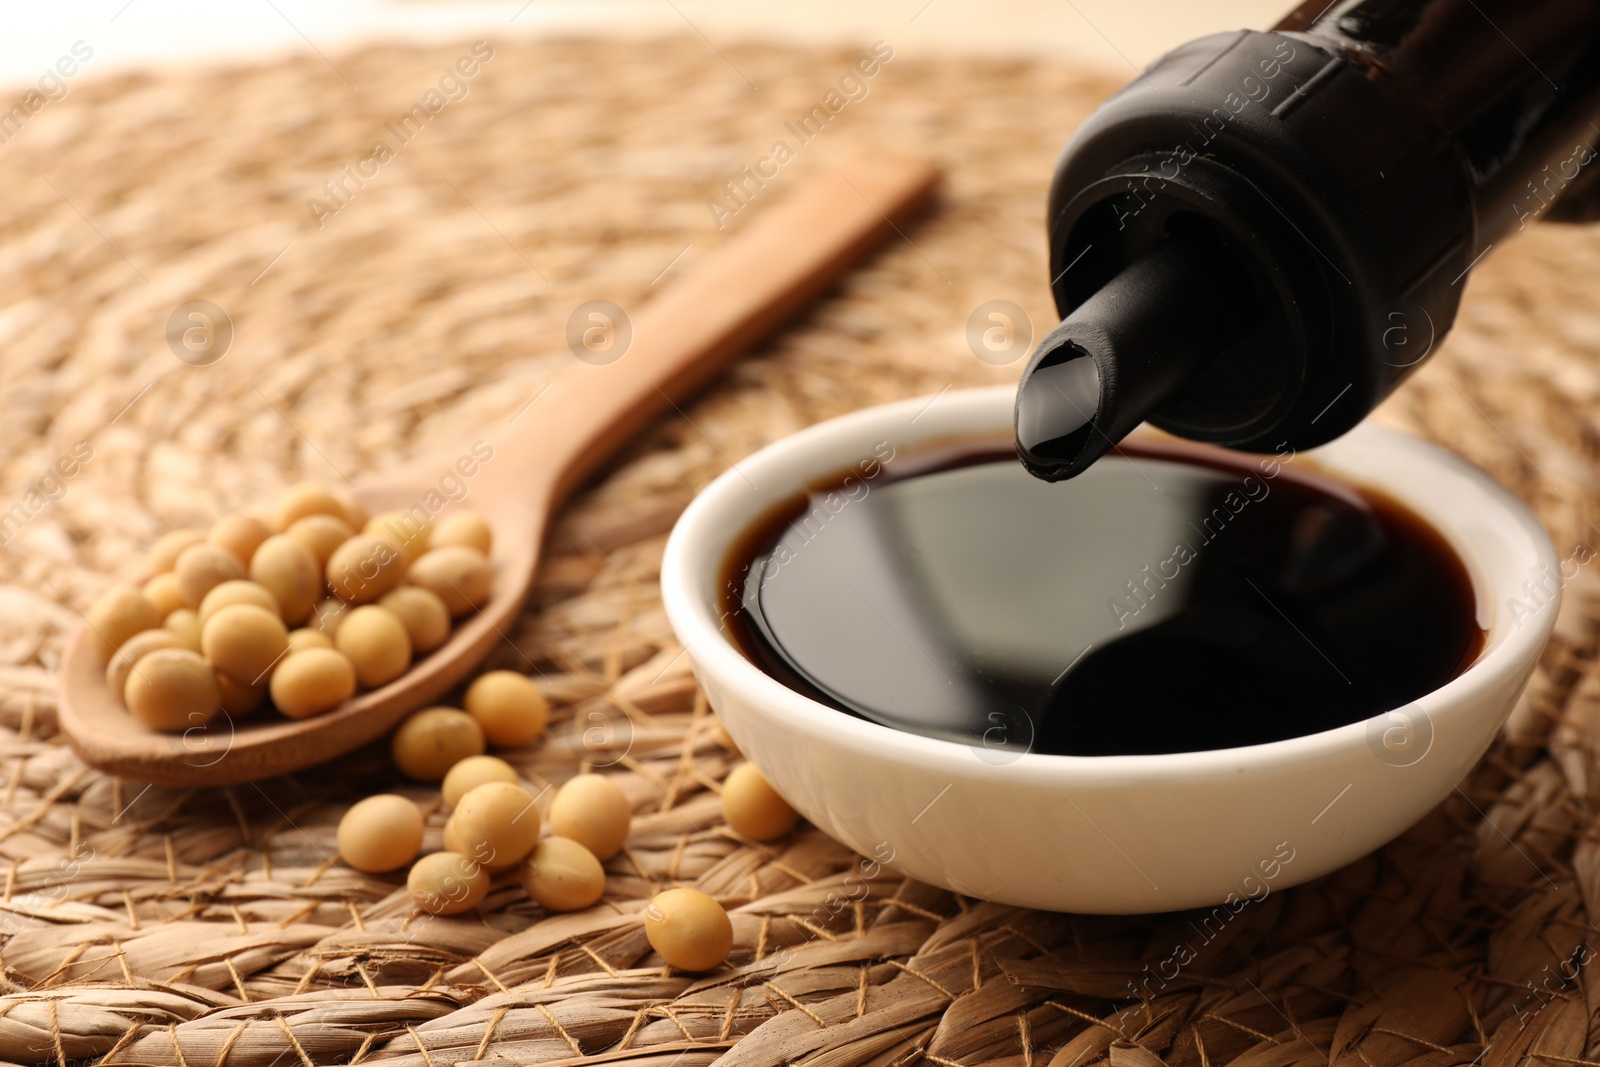 Photo of Holding bottle above bowl with soy sauce, closeup